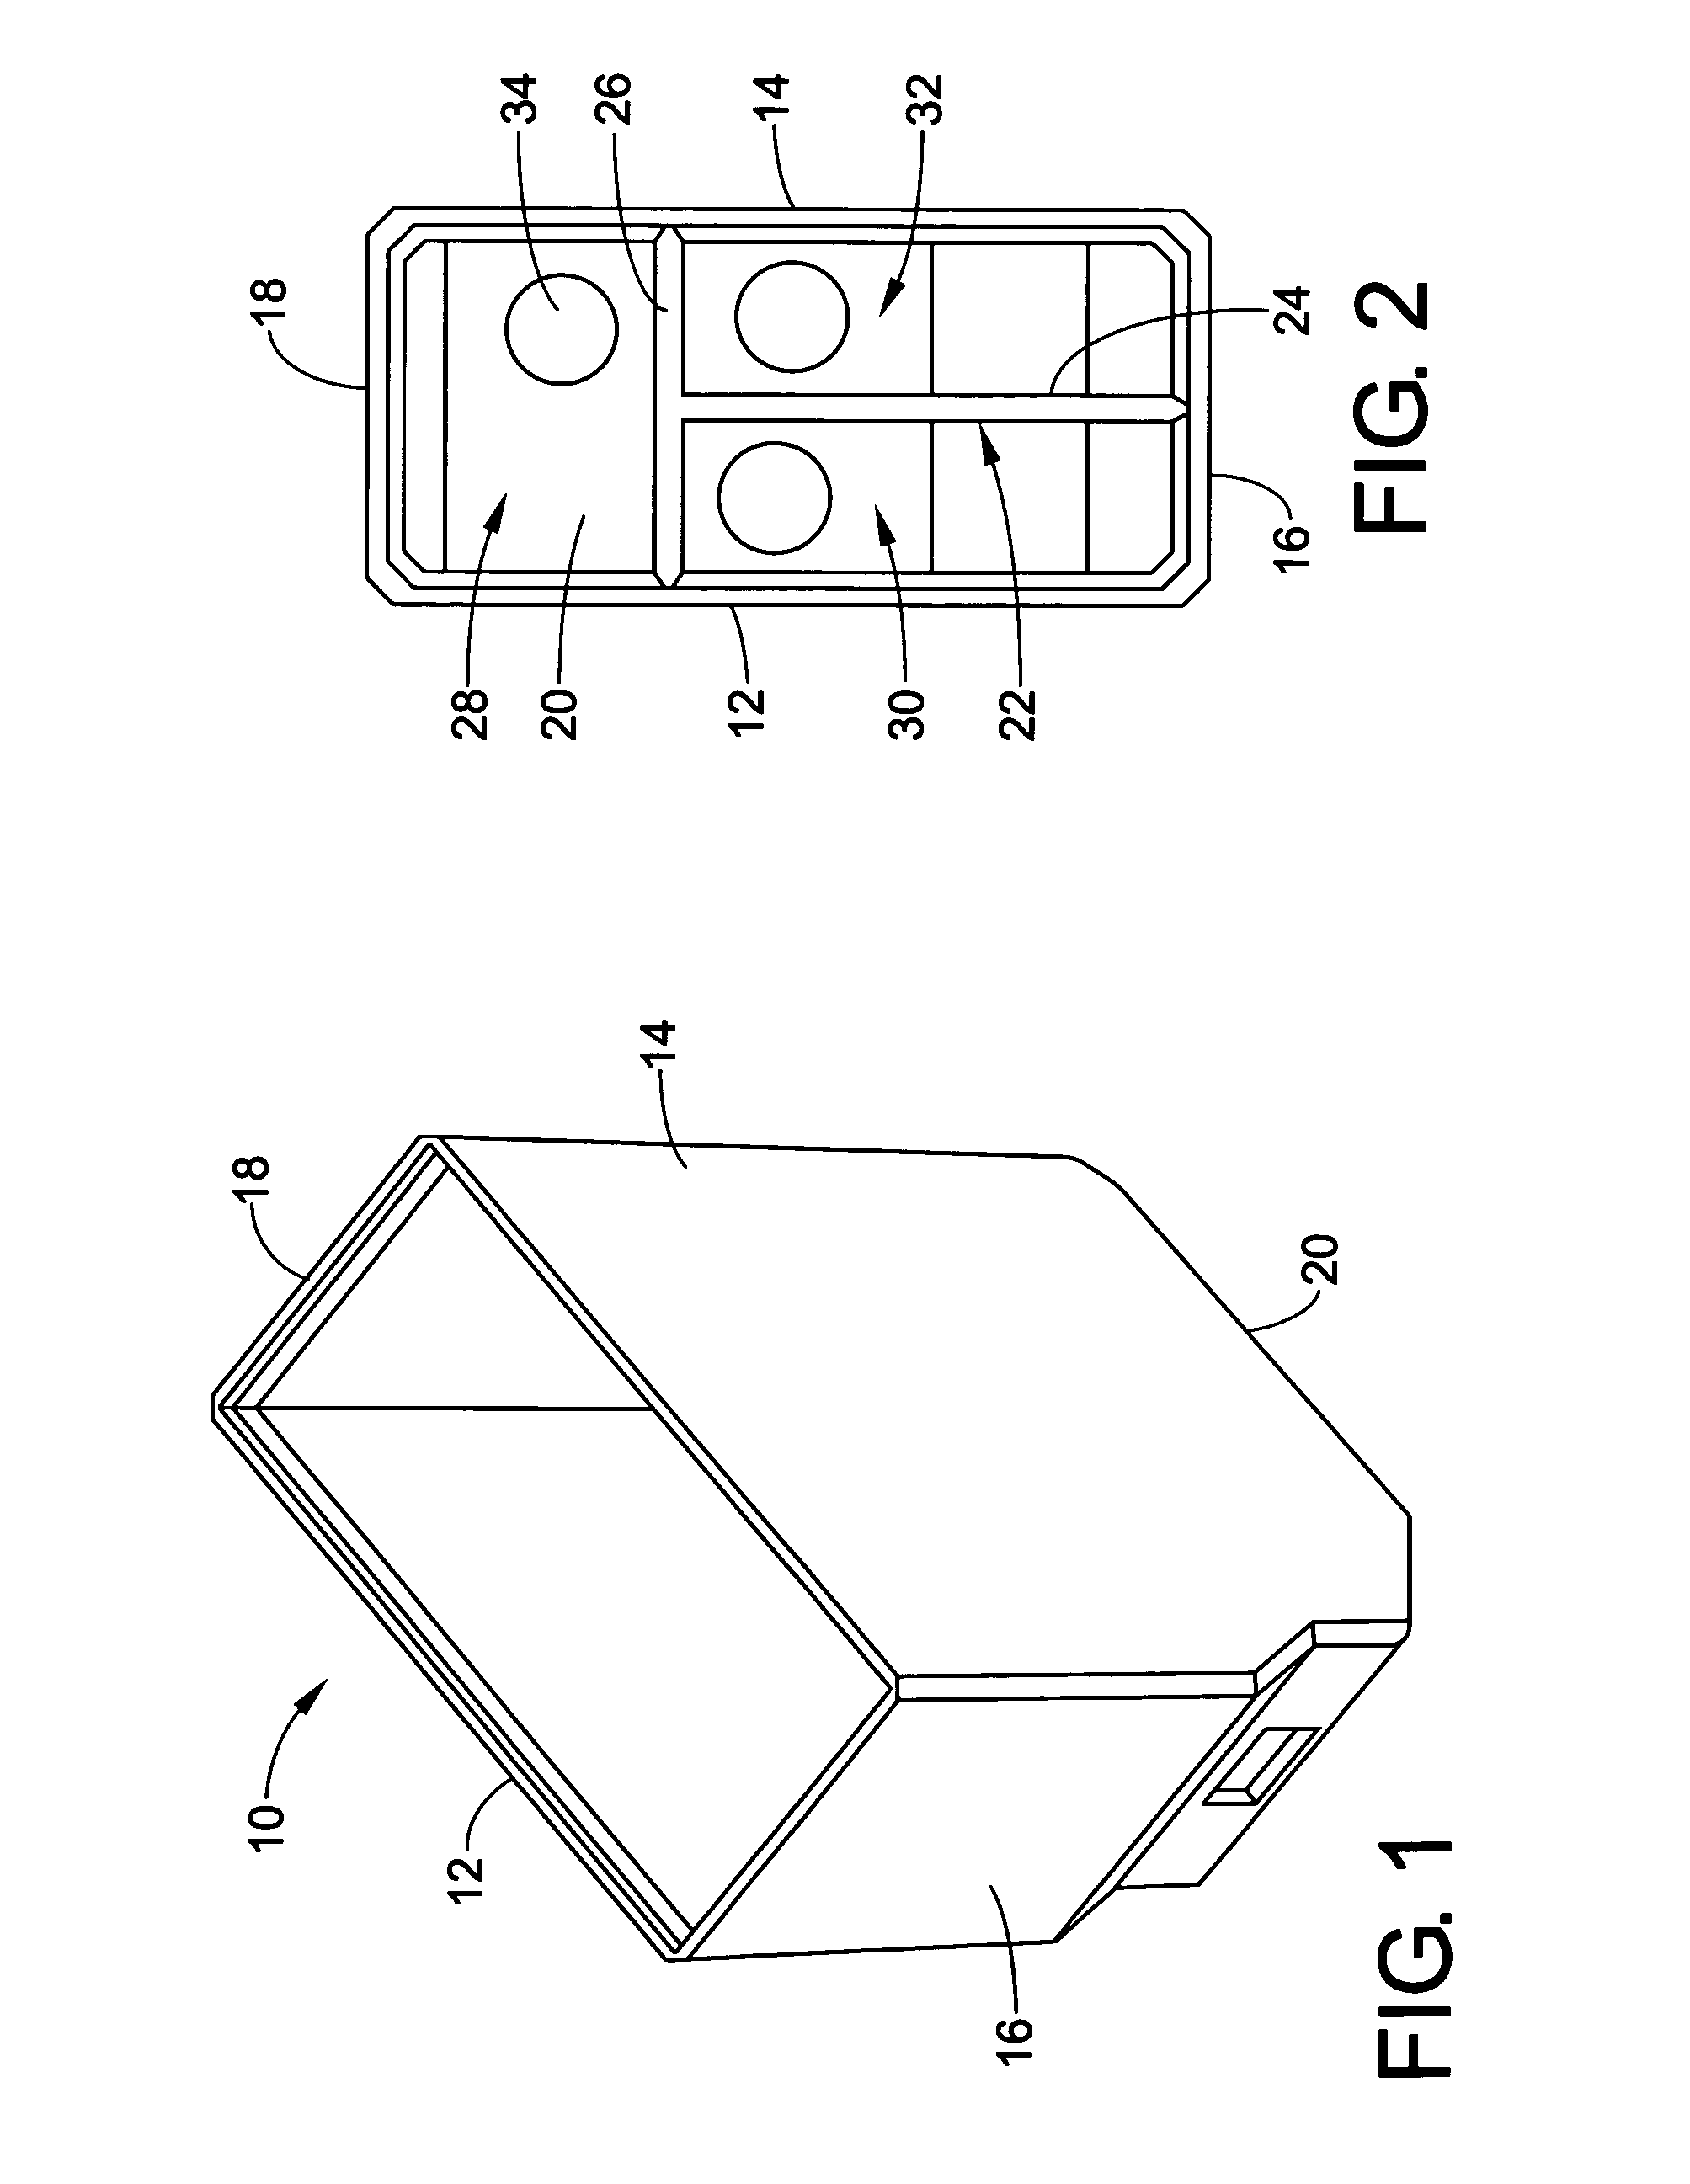 Partition structures for the interior of an ink container